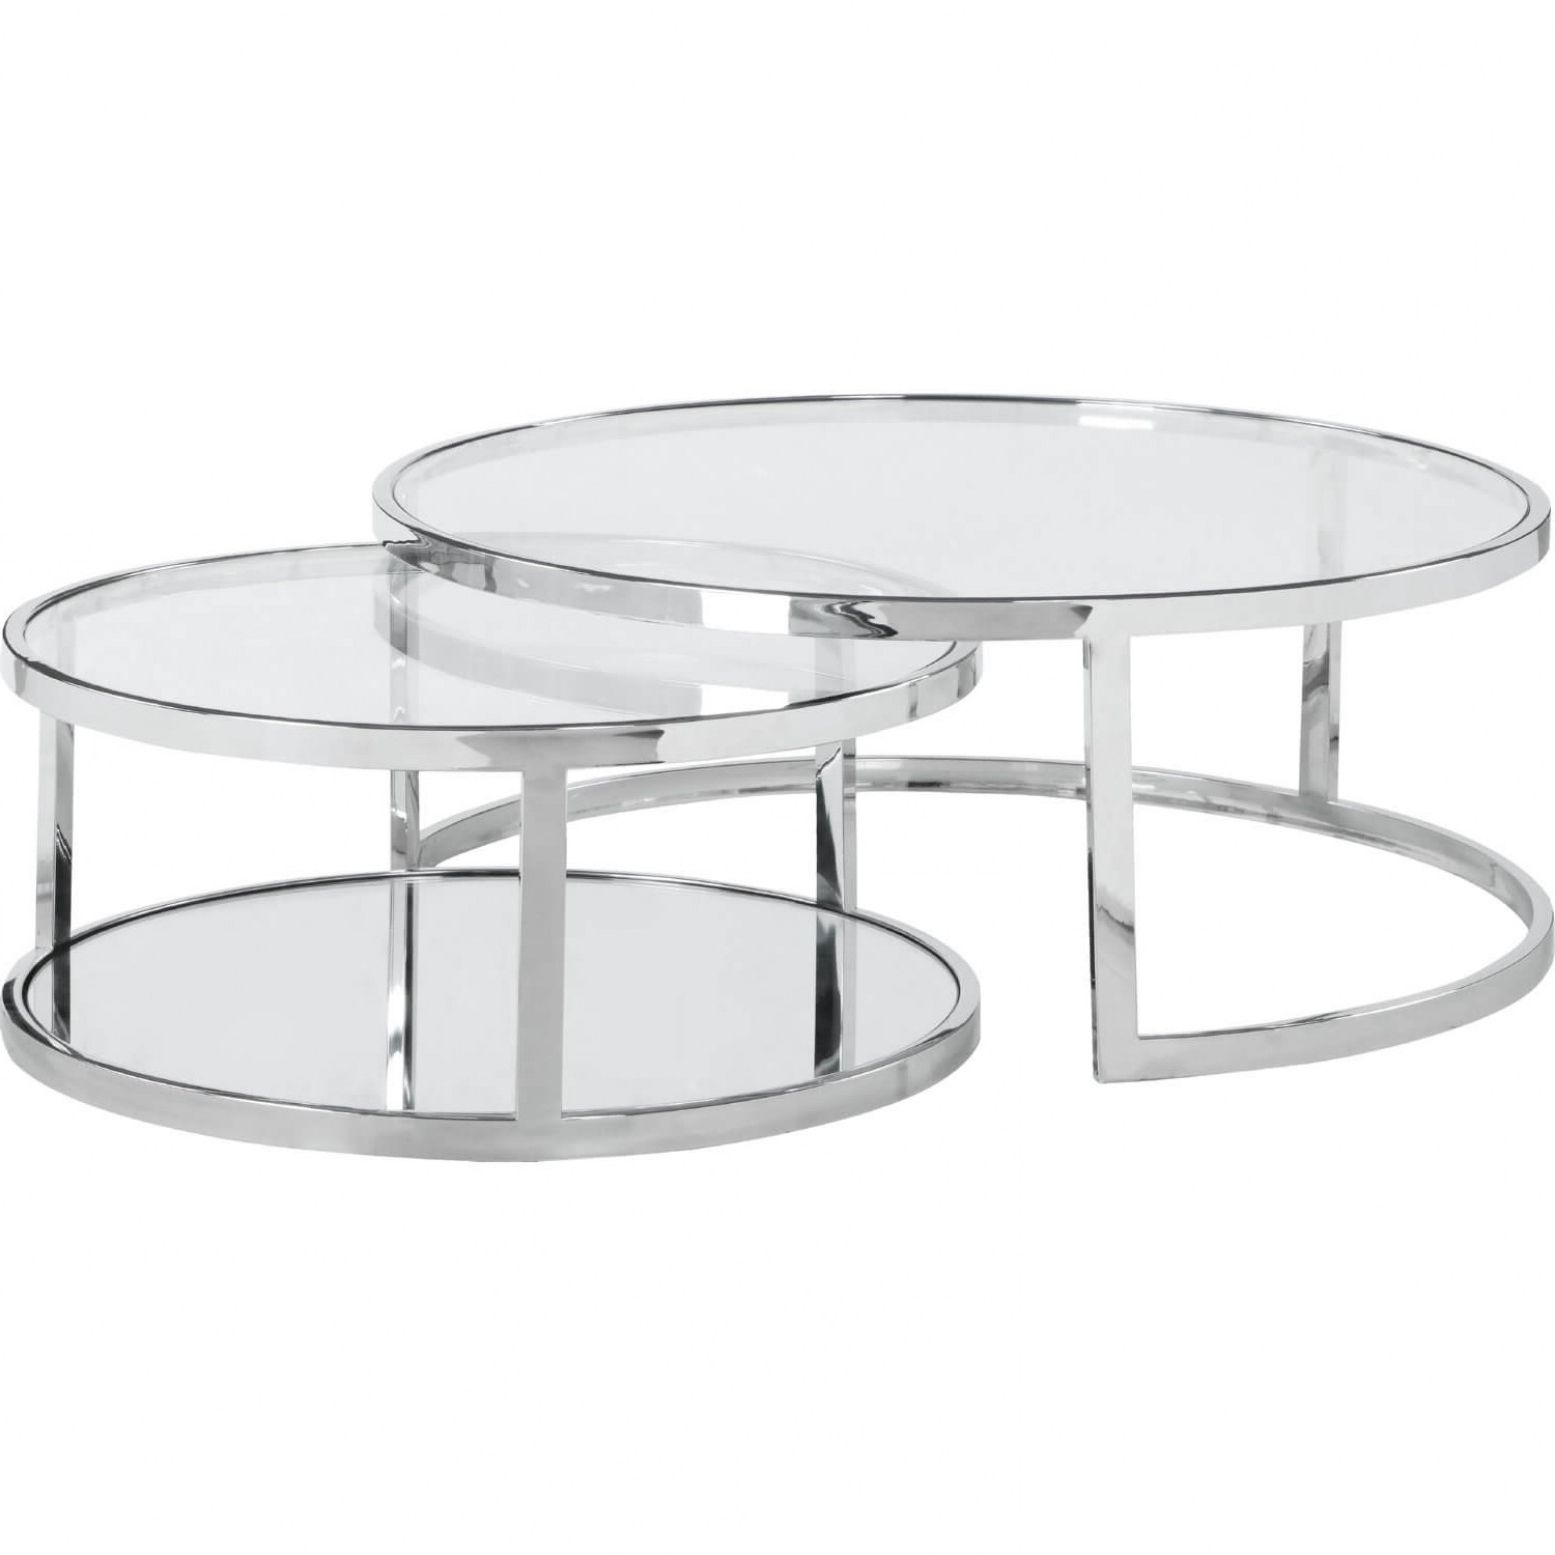 5509 35 Round Nesting Cocktail Table, Clear/polished With Famous Polished Chrome Round Cocktail Tables (View 9 of 20)